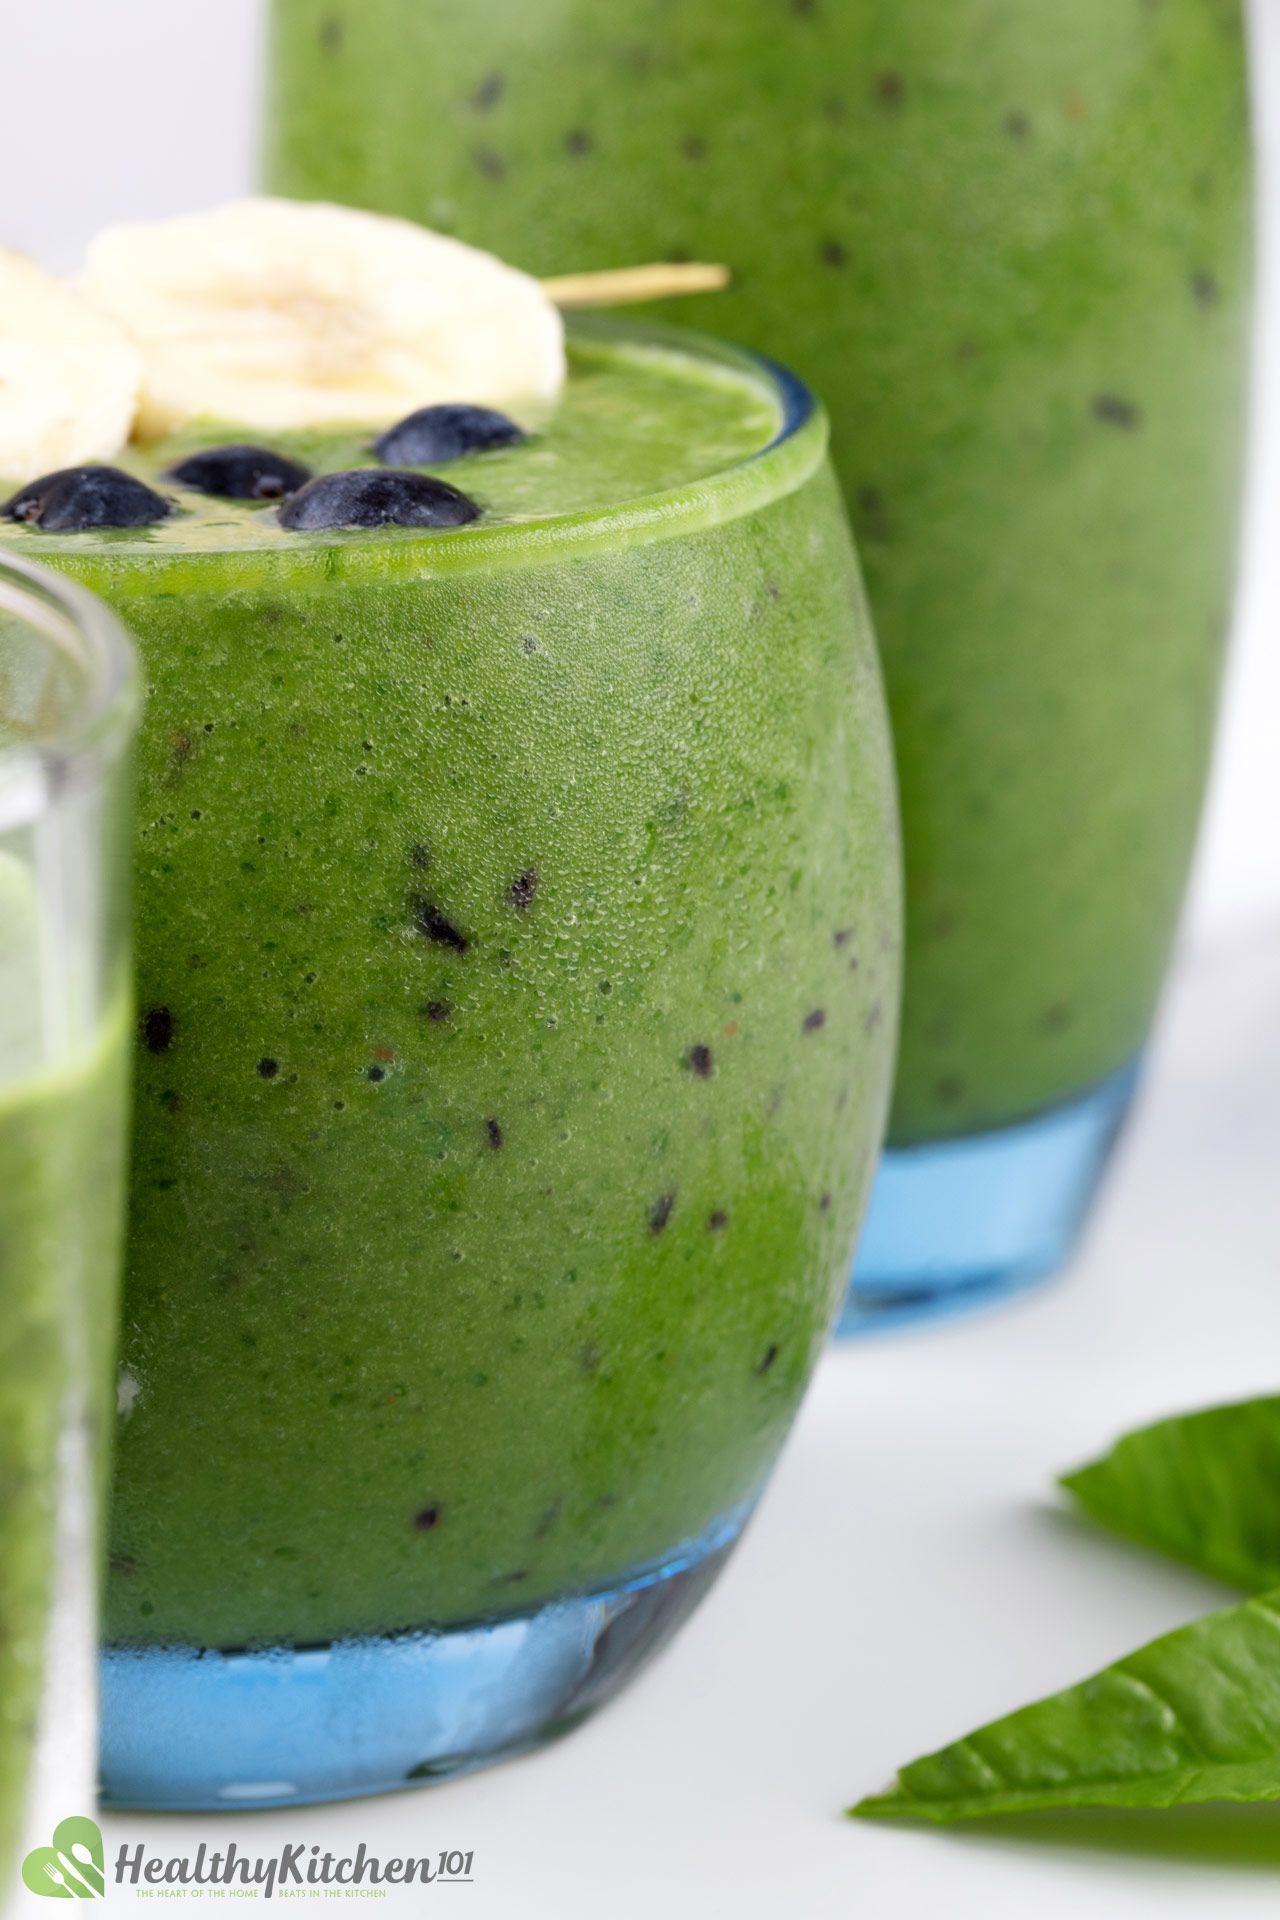 Calories in Green Smoothie